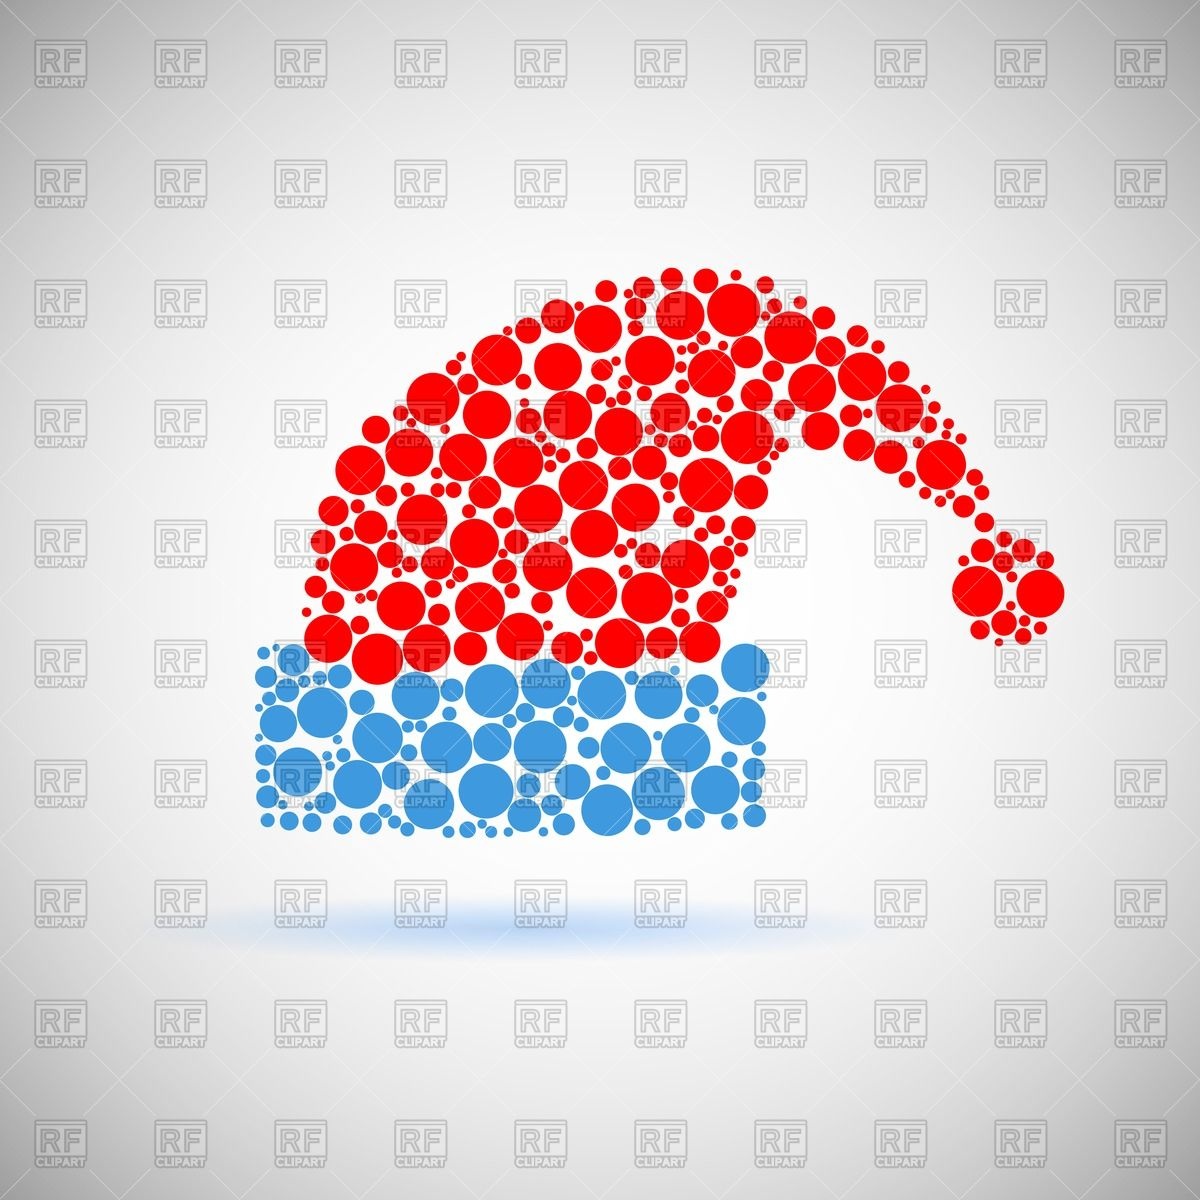 Santa Claus Red Hat Icon Made Of Circles Download Royalty Free Vector